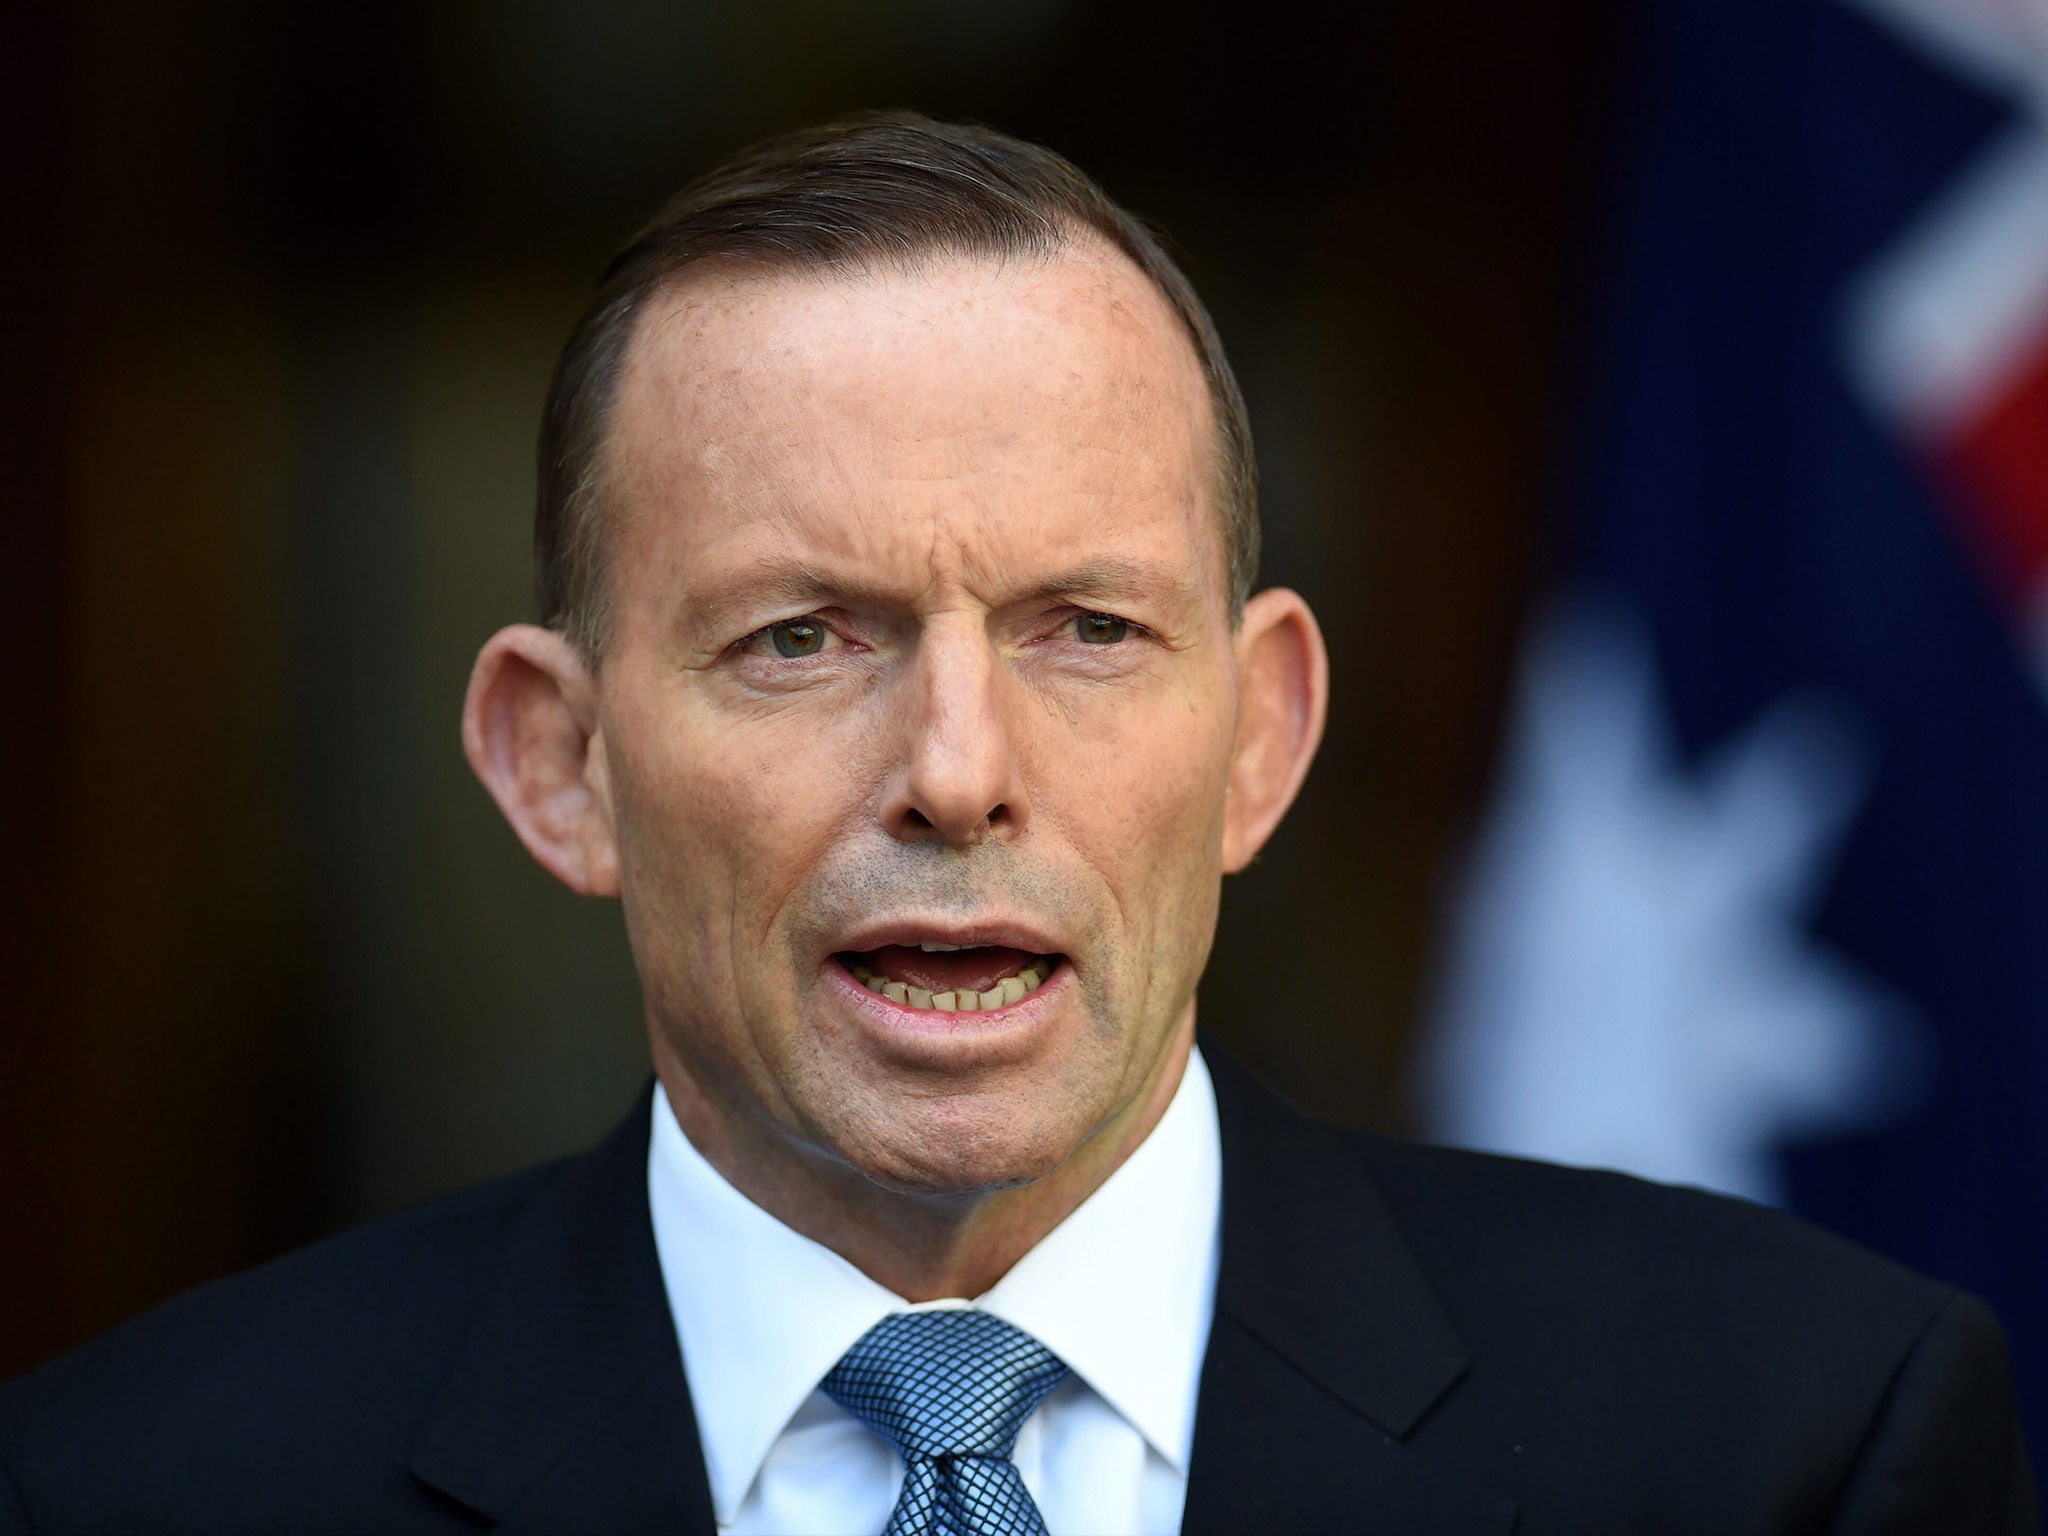 Tony Abbott was one of the most high-profile campaigners against gay marriage